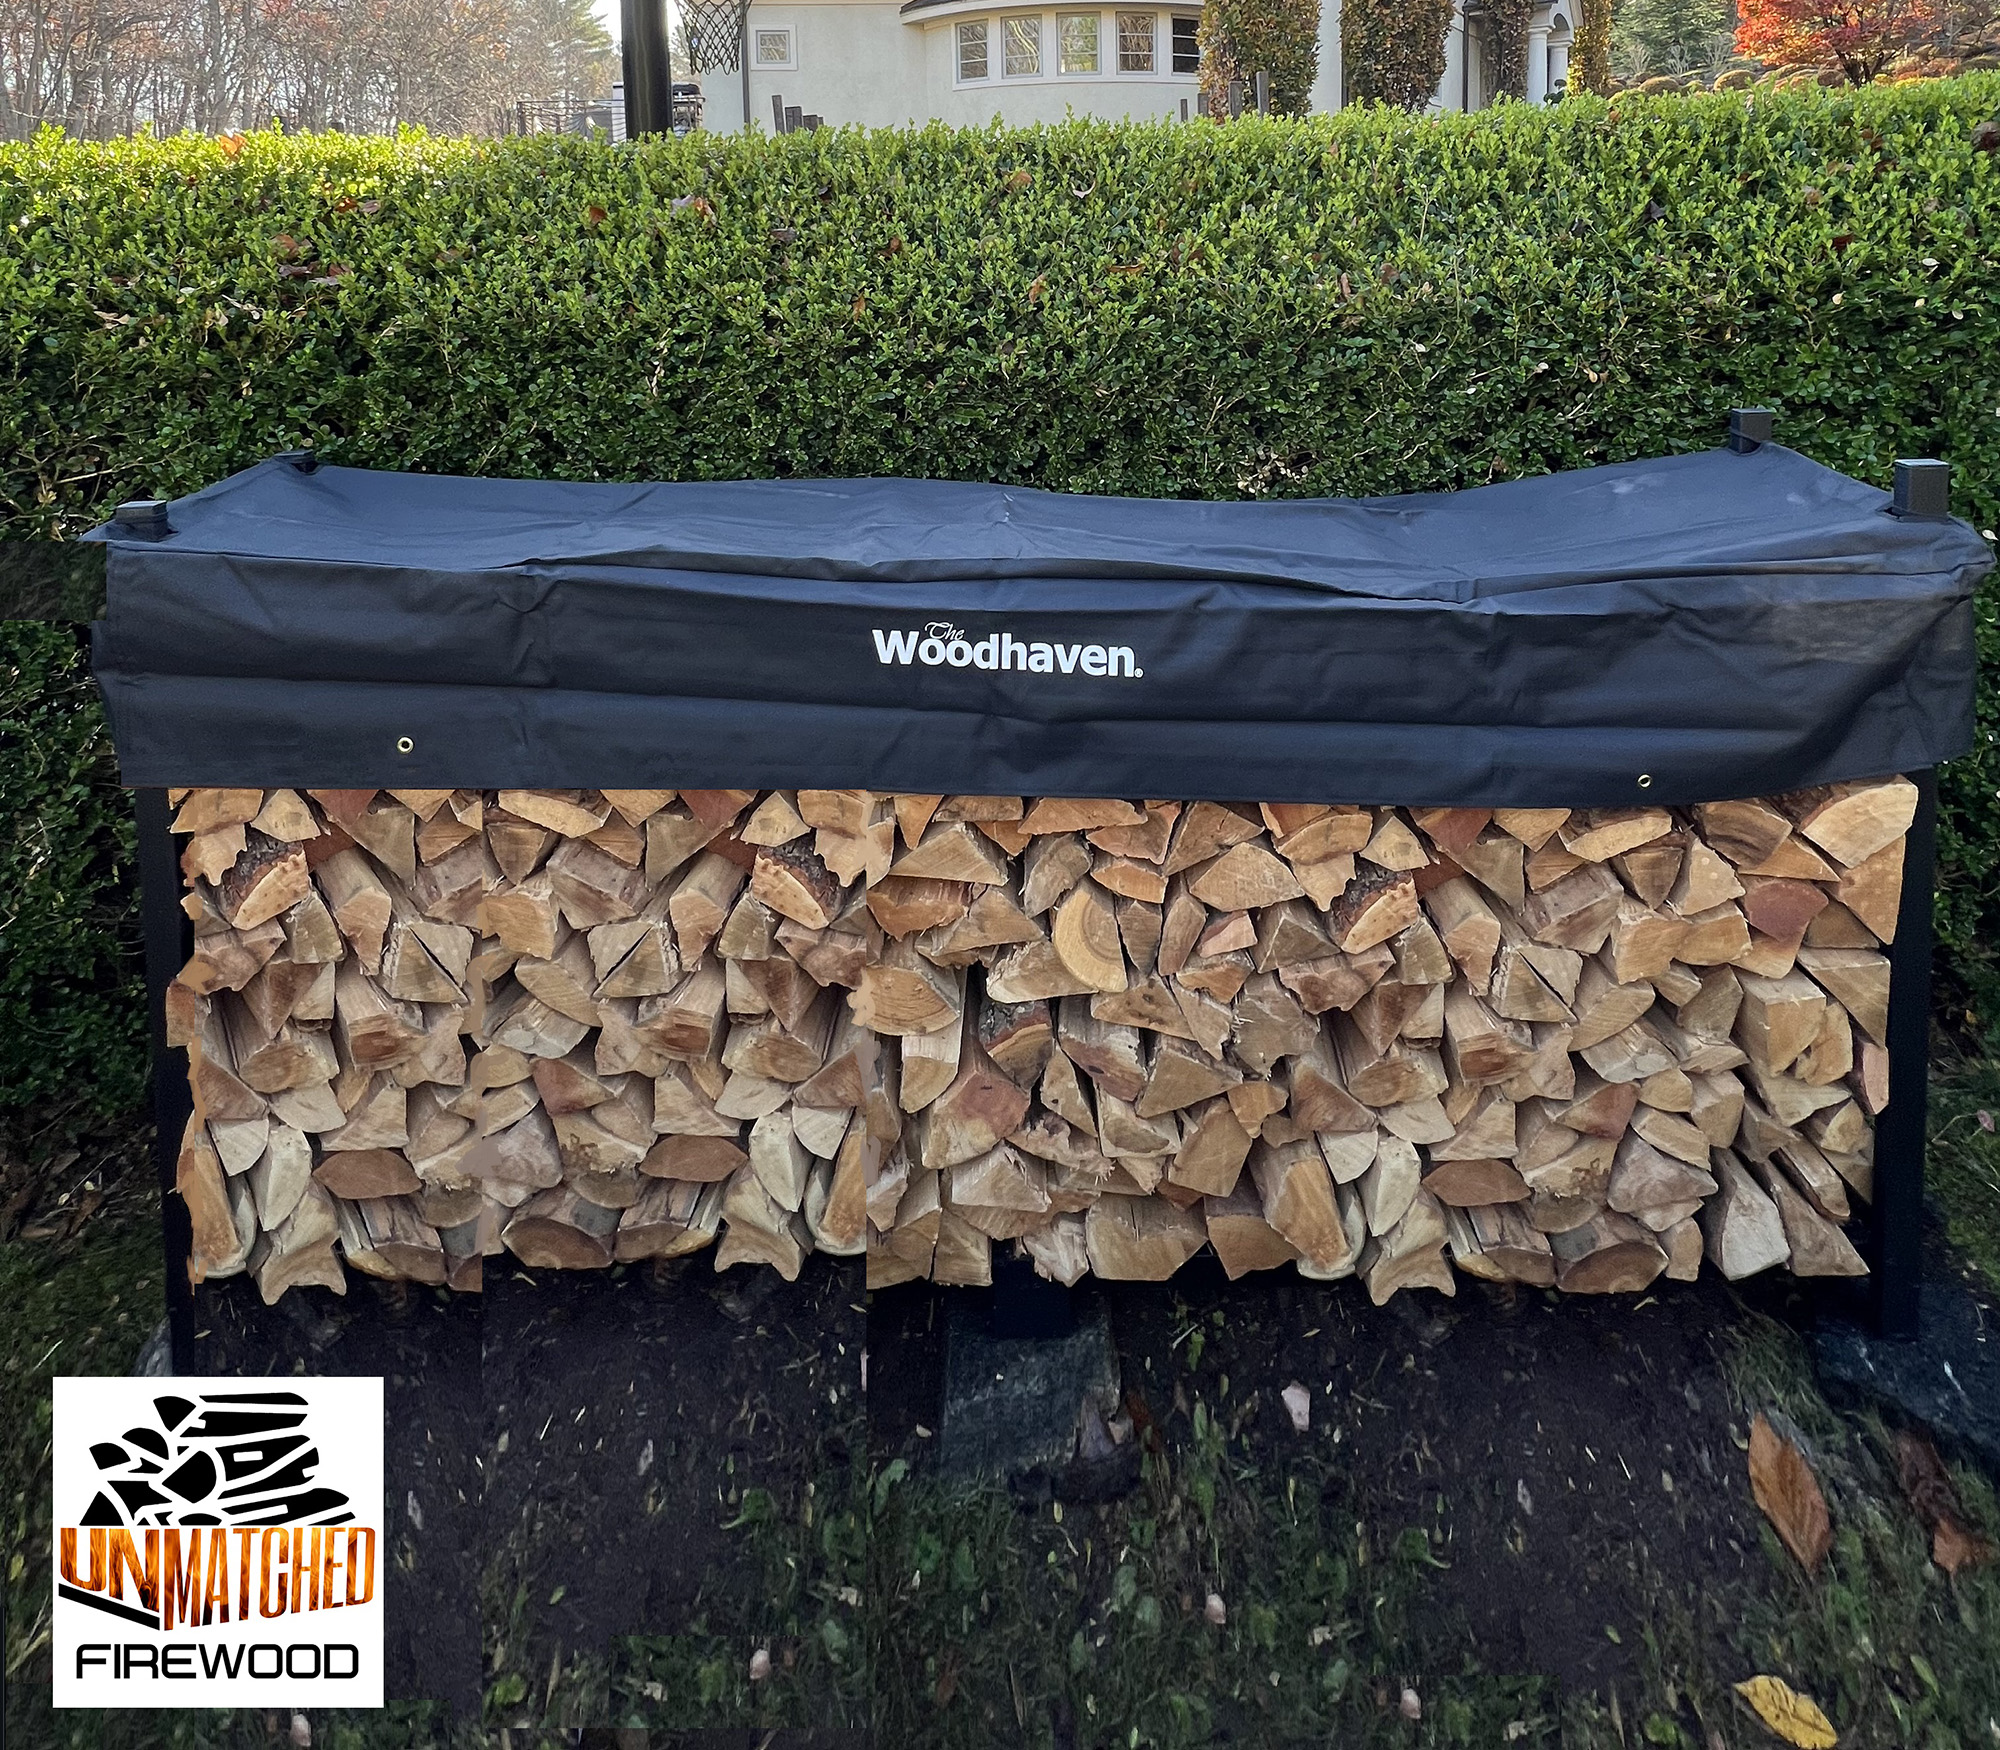 1/3 Cord of Kiln Dried Firewood, Delivered and Stacked